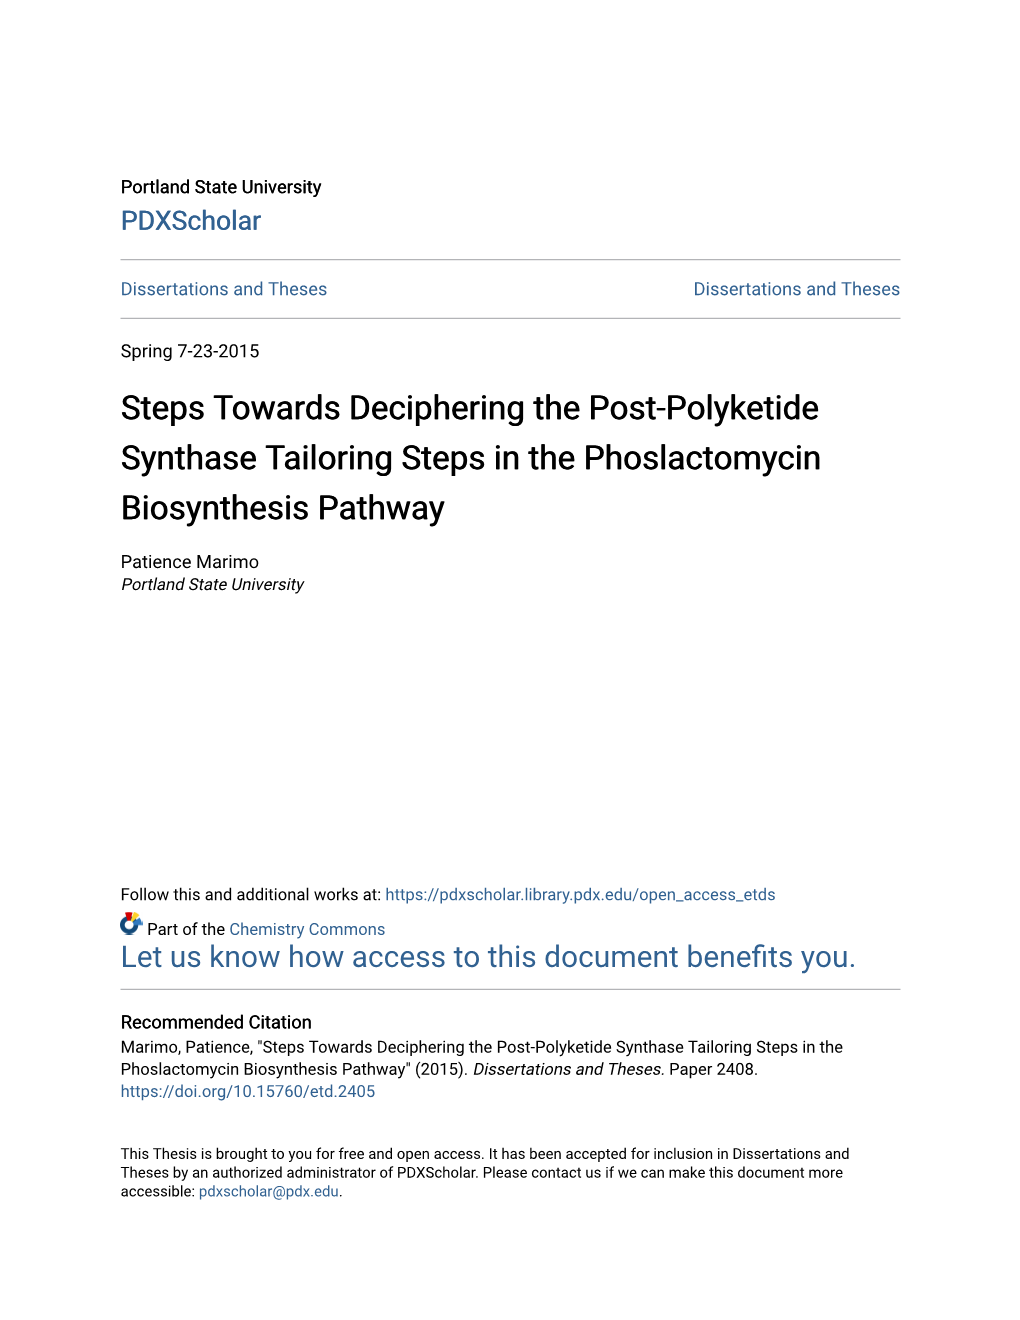 Steps Towards Deciphering the Post-Polyketide Synthase Tailoring Steps in the Phoslactomycin Biosynthesis Pathway